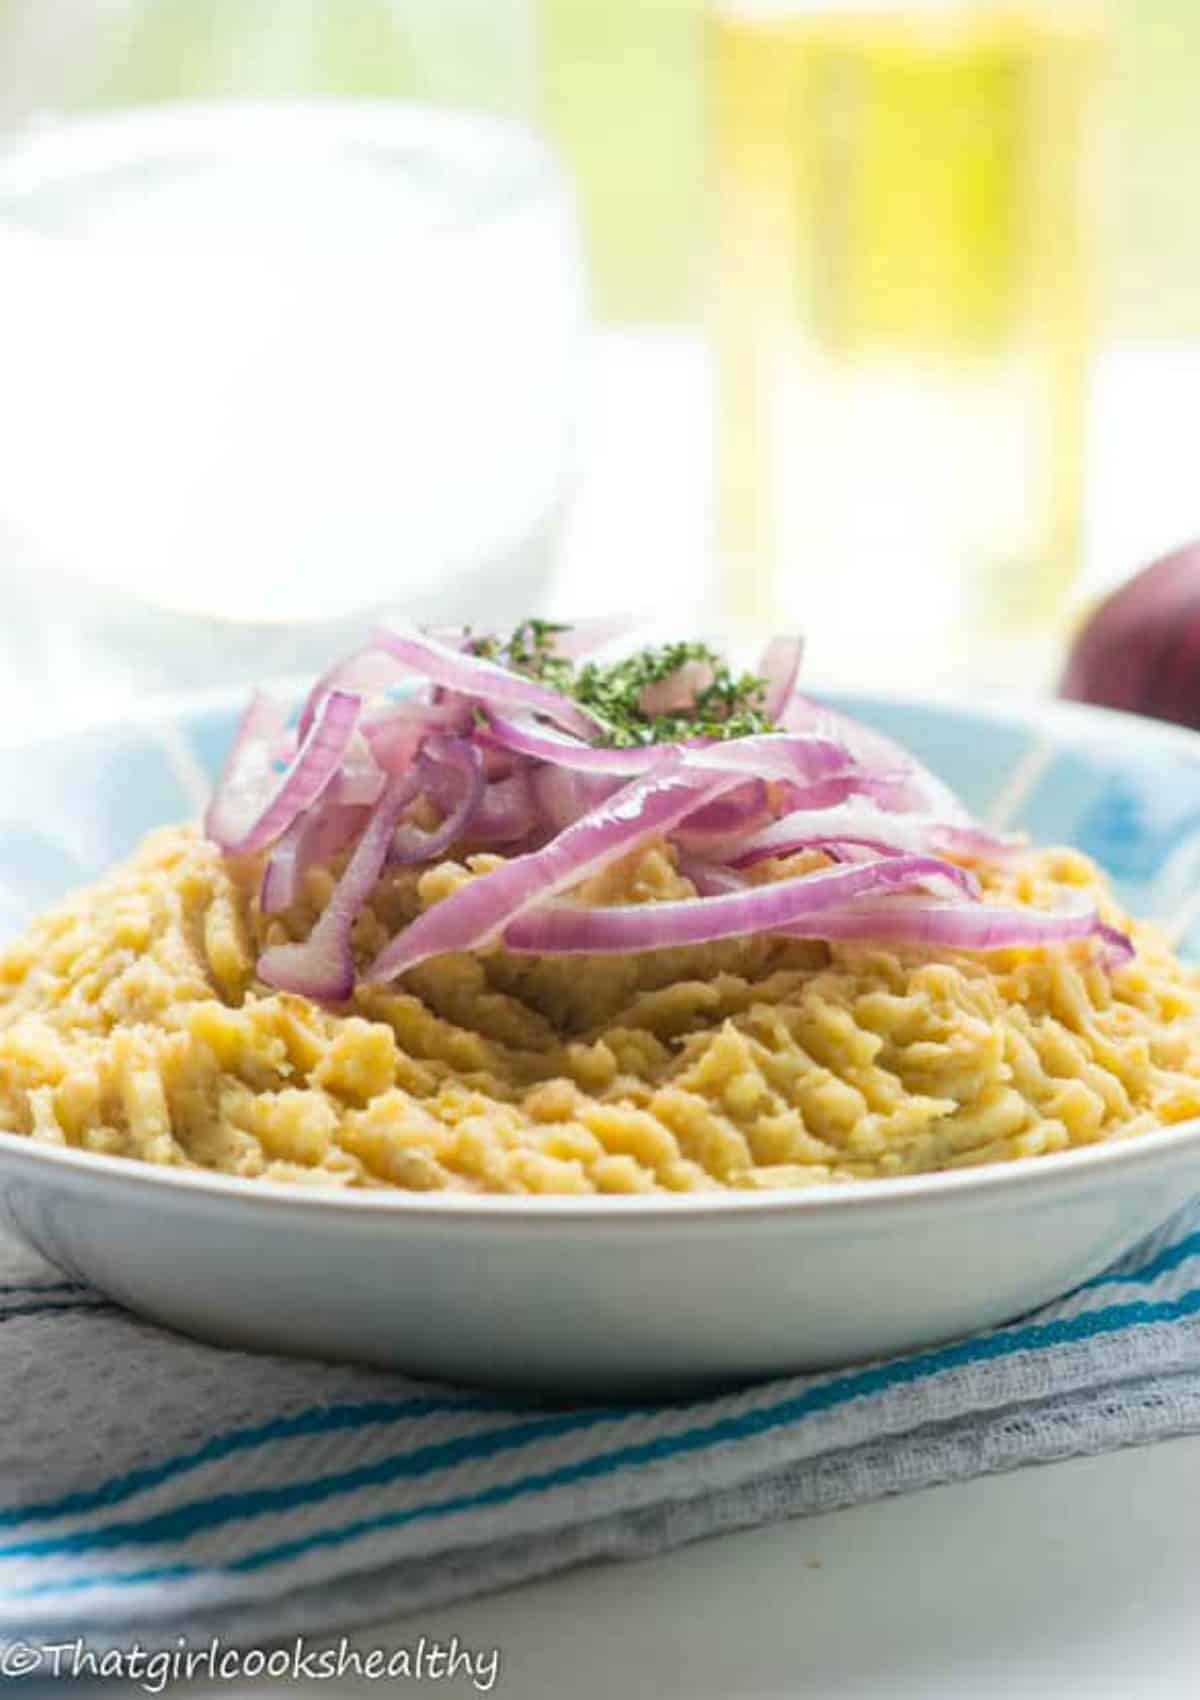 Mashed plantain with red onion garnish